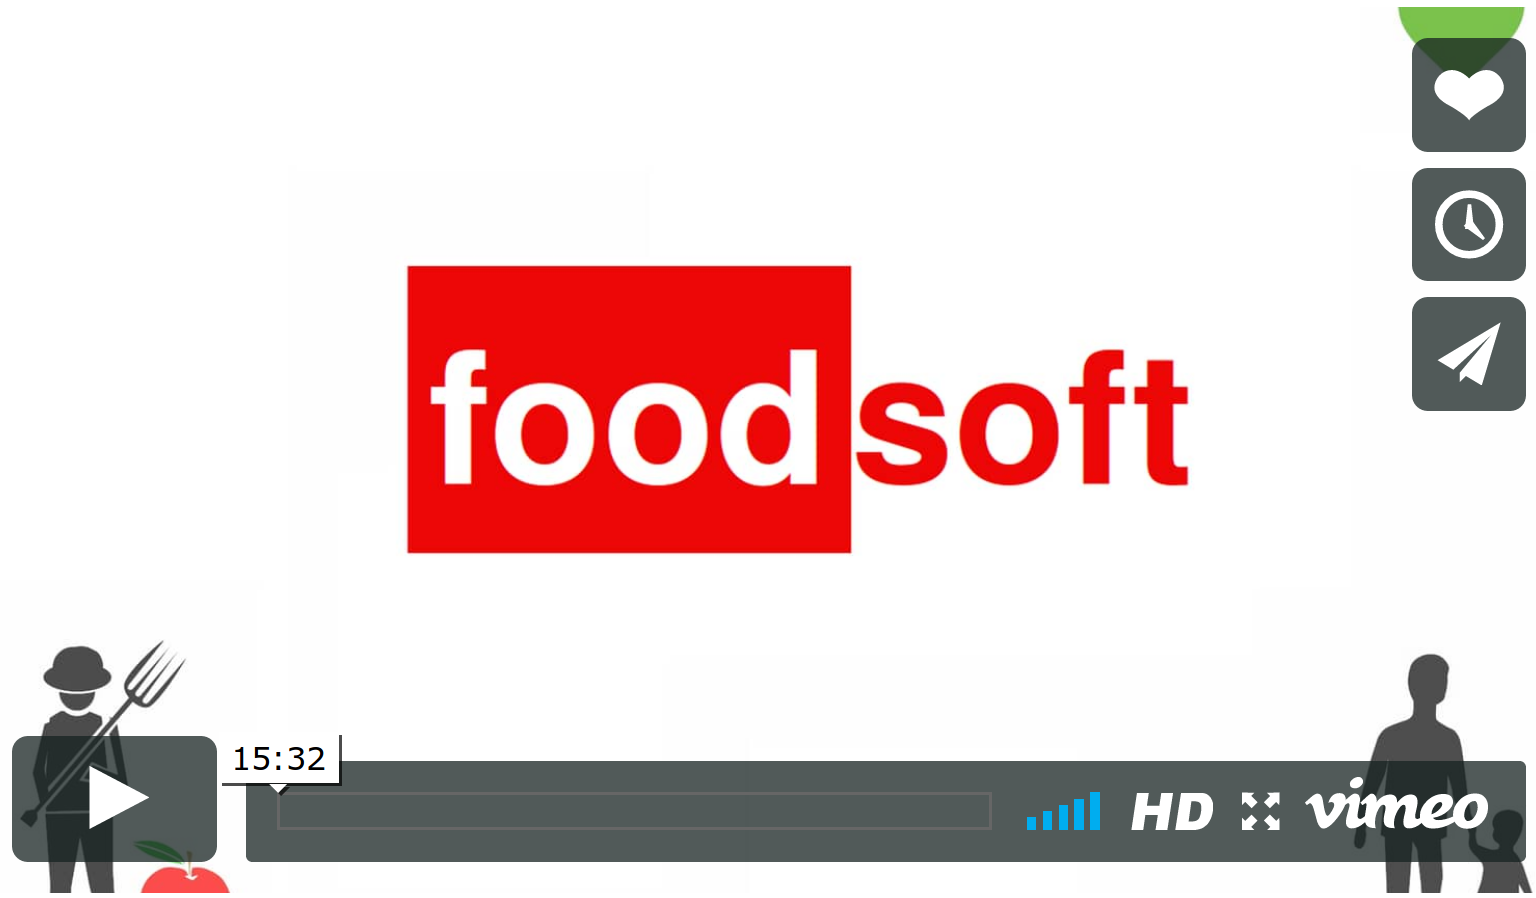 Foodsoft introduction video